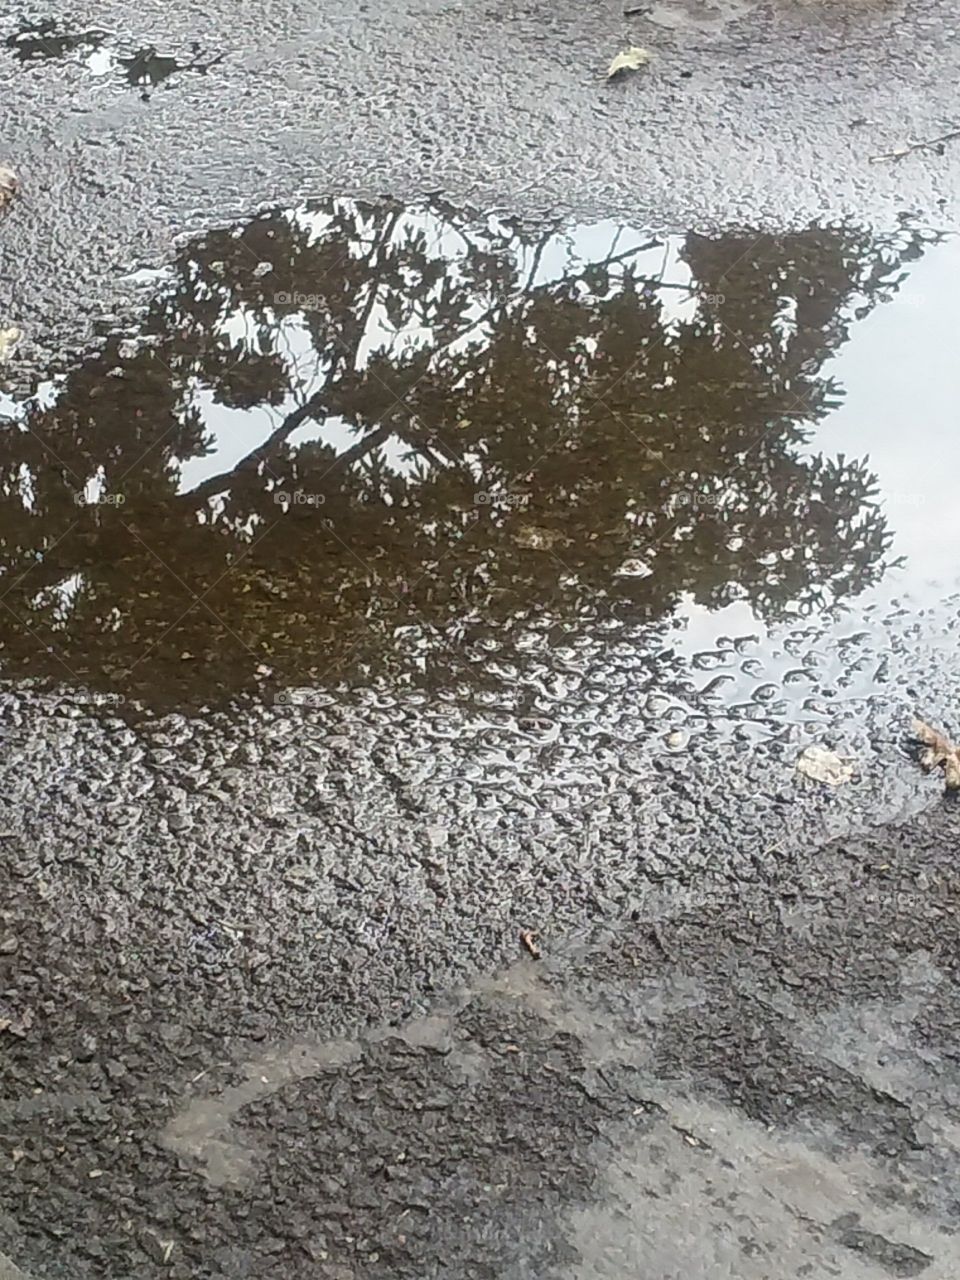 reflection in the puddle